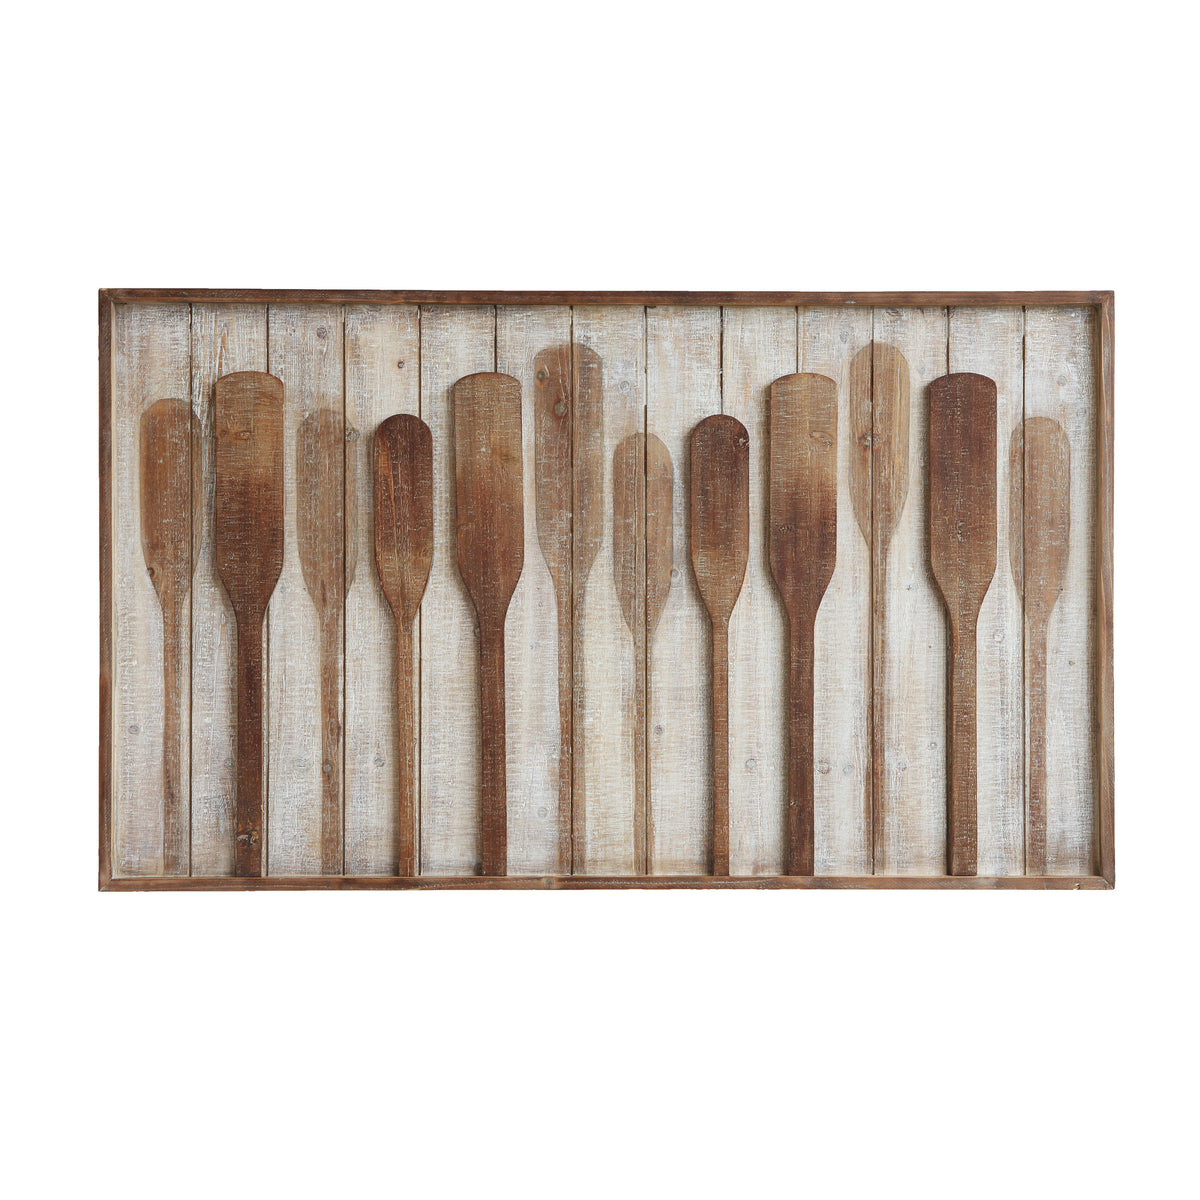 Framed Wall Decor with Raised Paddles